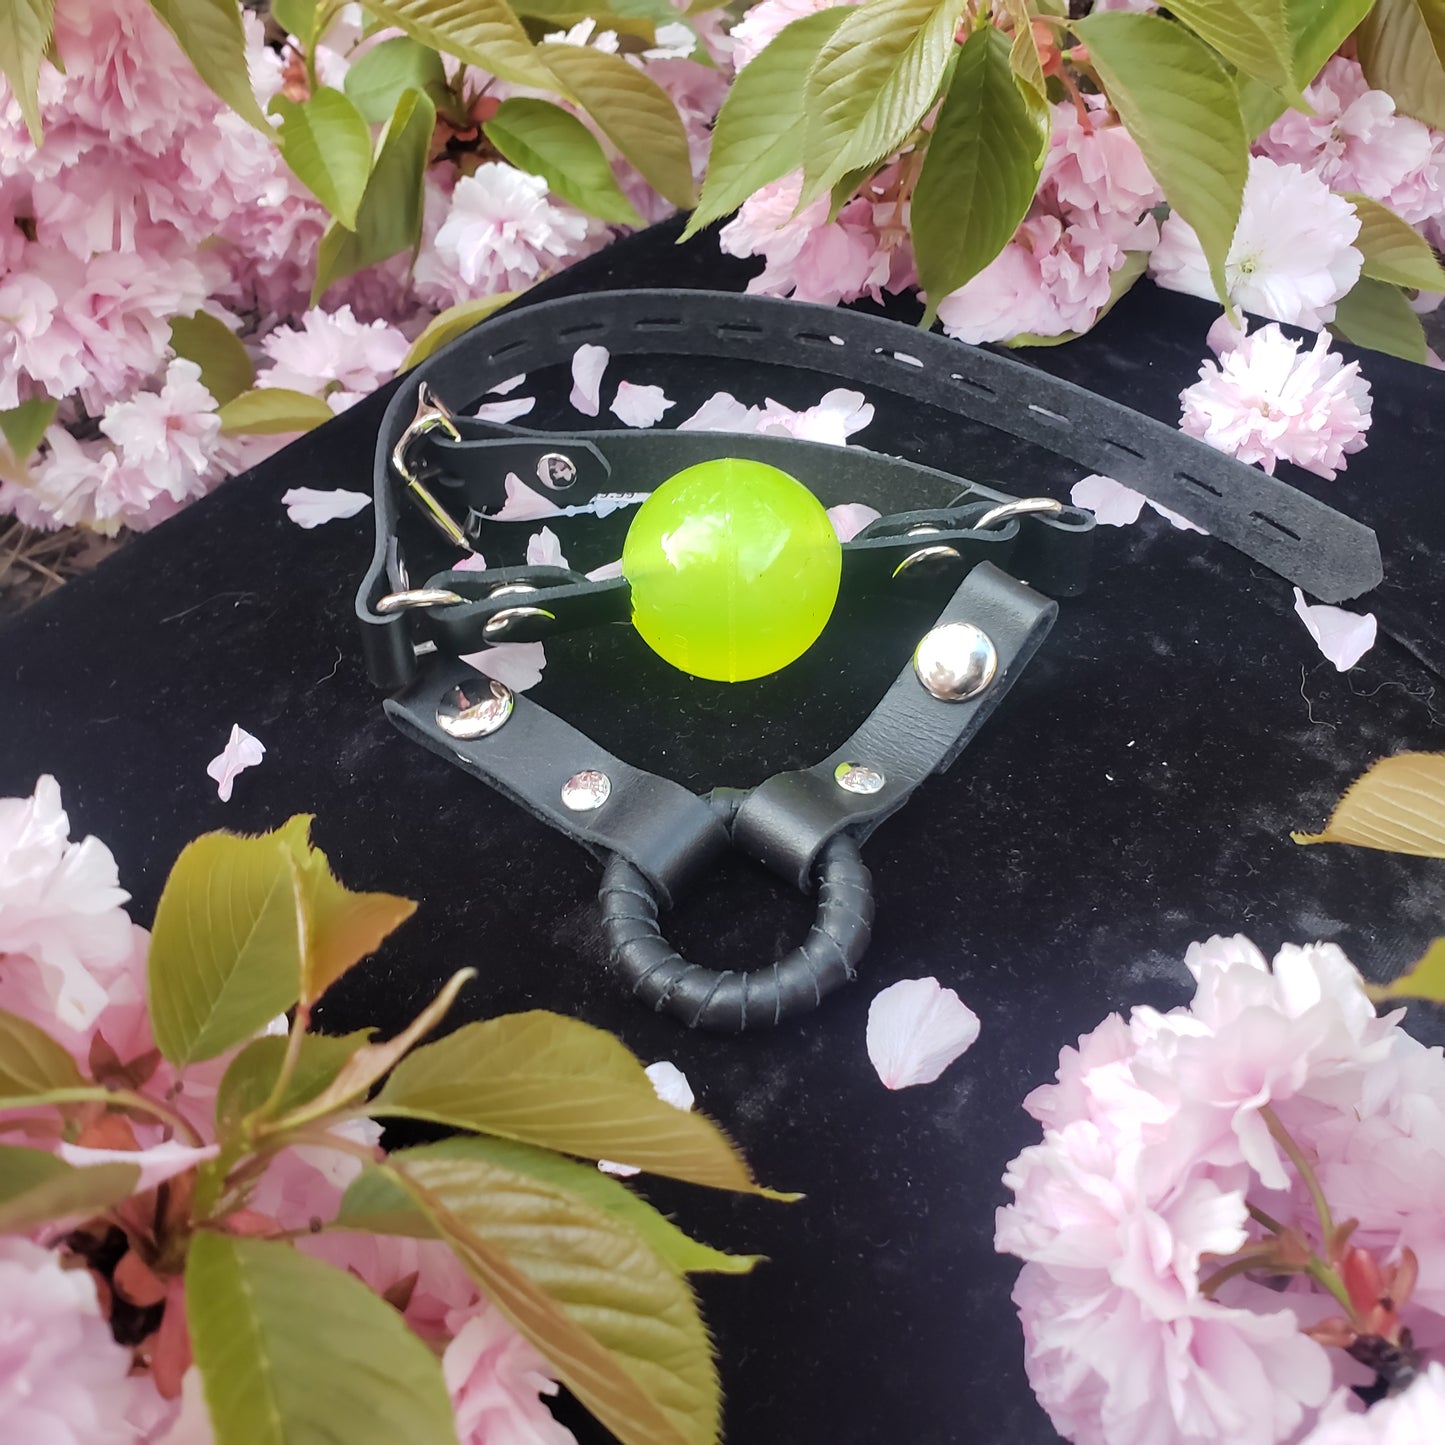 The Interchangeable Ball/Ring Gag shown with a neon yellow ball and a ring.